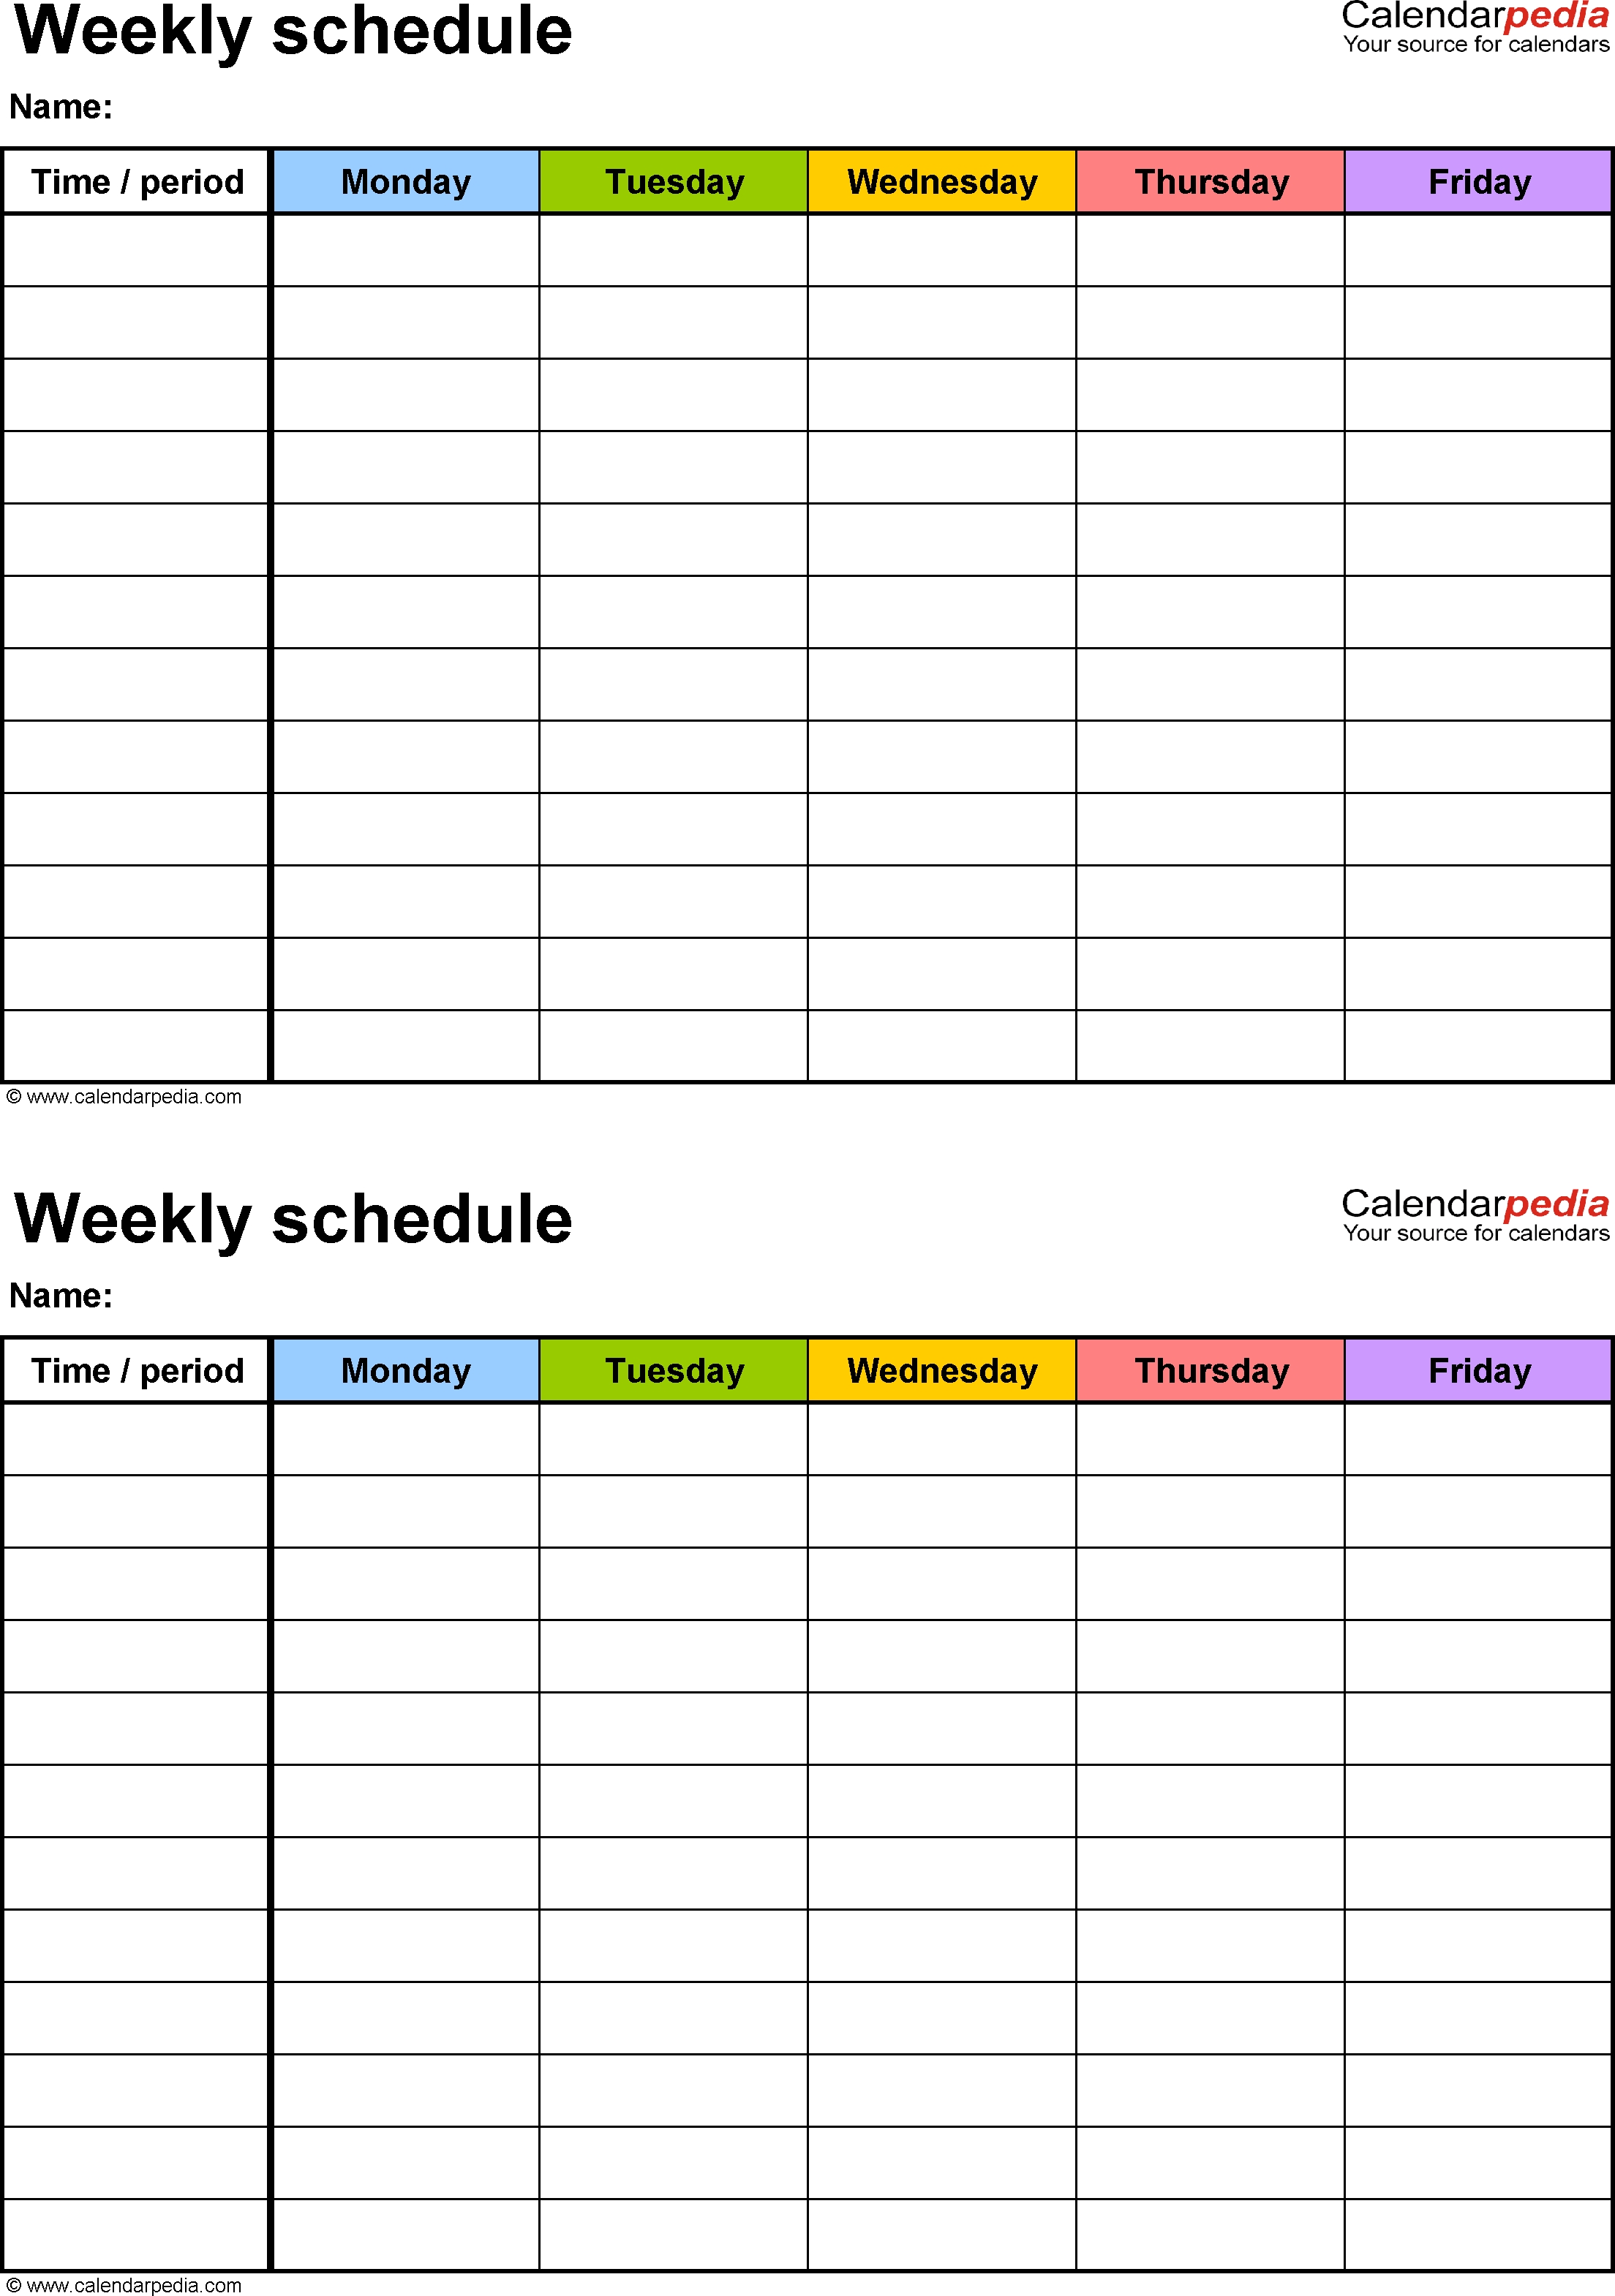 Free Weekly Schedule Templates For Word - 18 Templates  Monday Through Friday Daily Planner